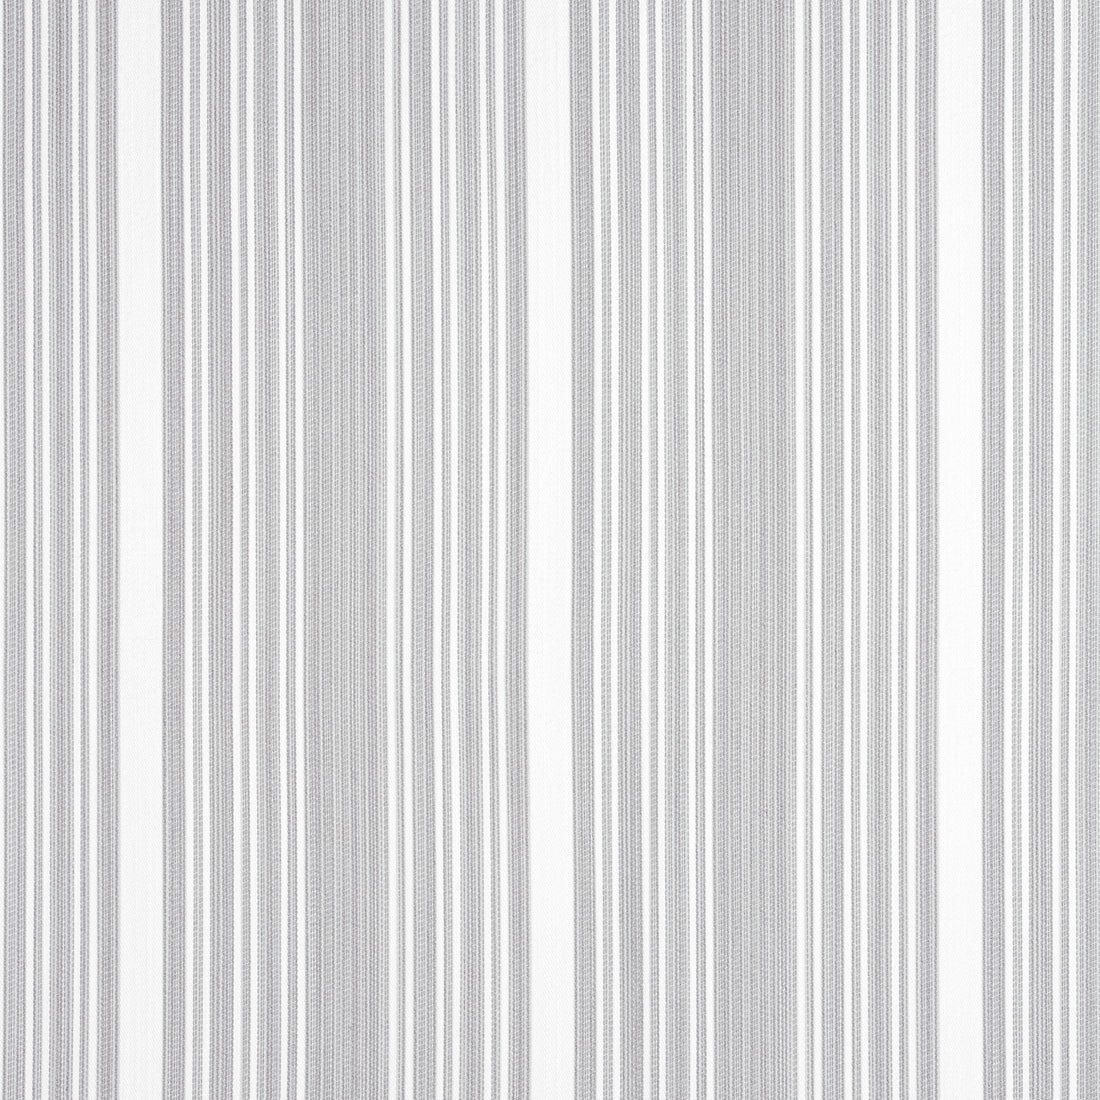 Kaia Stripe fabric in sterling color - pattern number W8536 - by Thibaut in the Villa collection